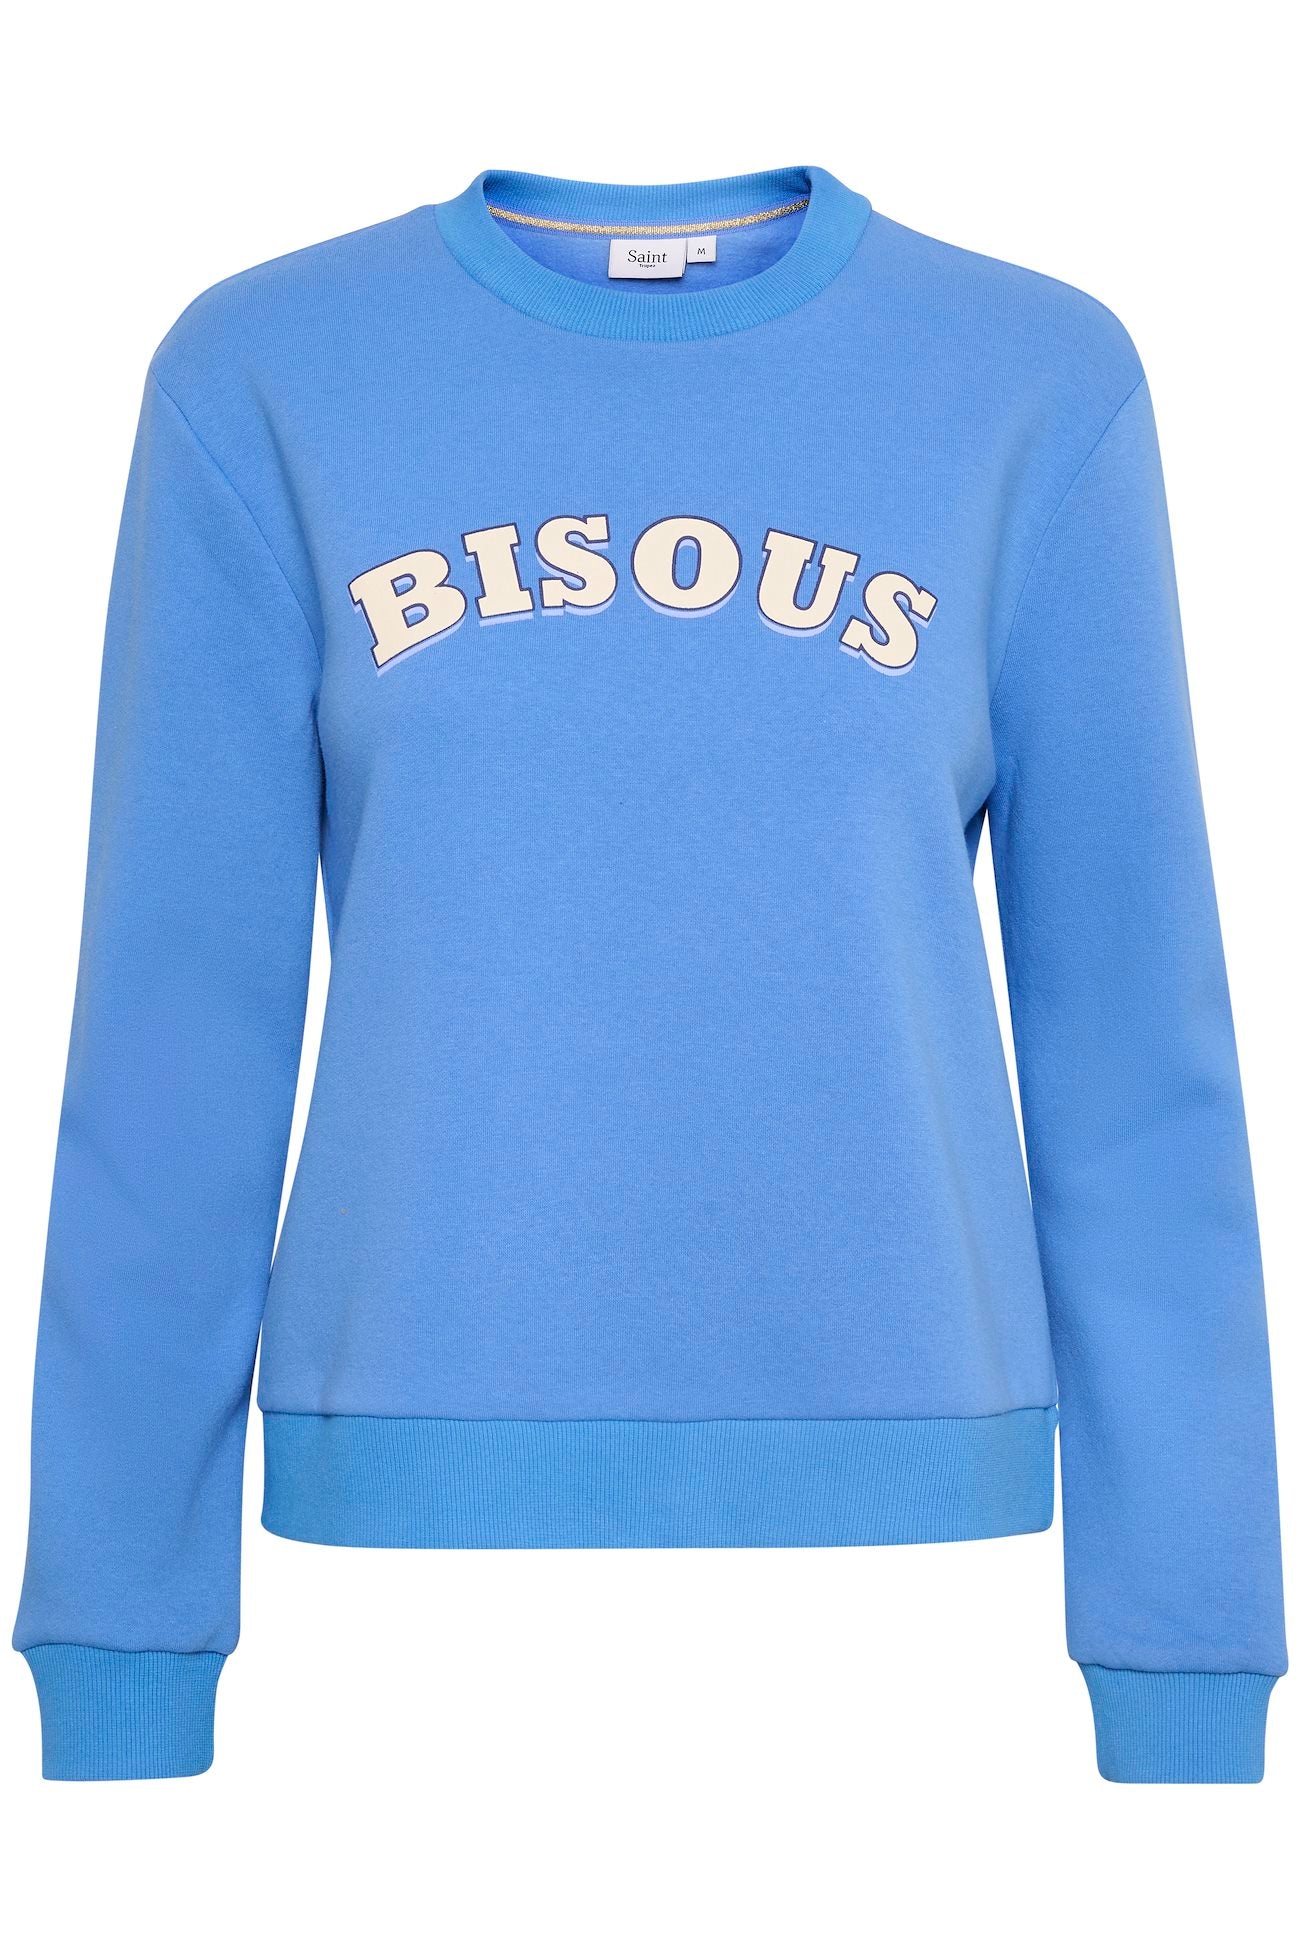 Bisous Sweater